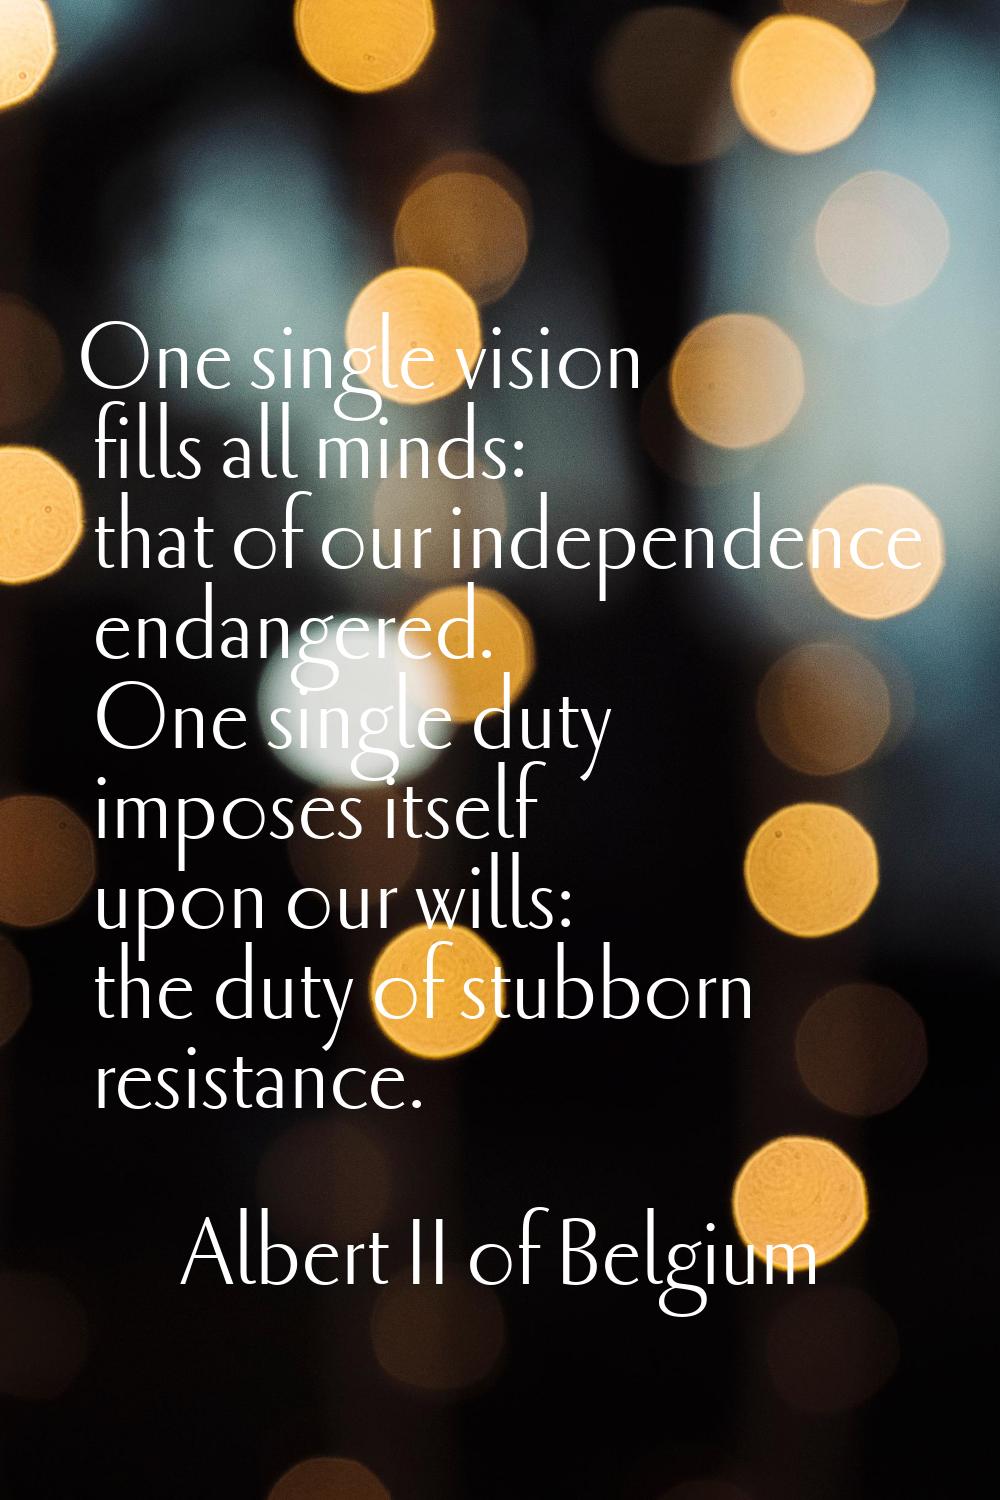 One single vision fills all minds: that of our independence endangered. One single duty imposes its